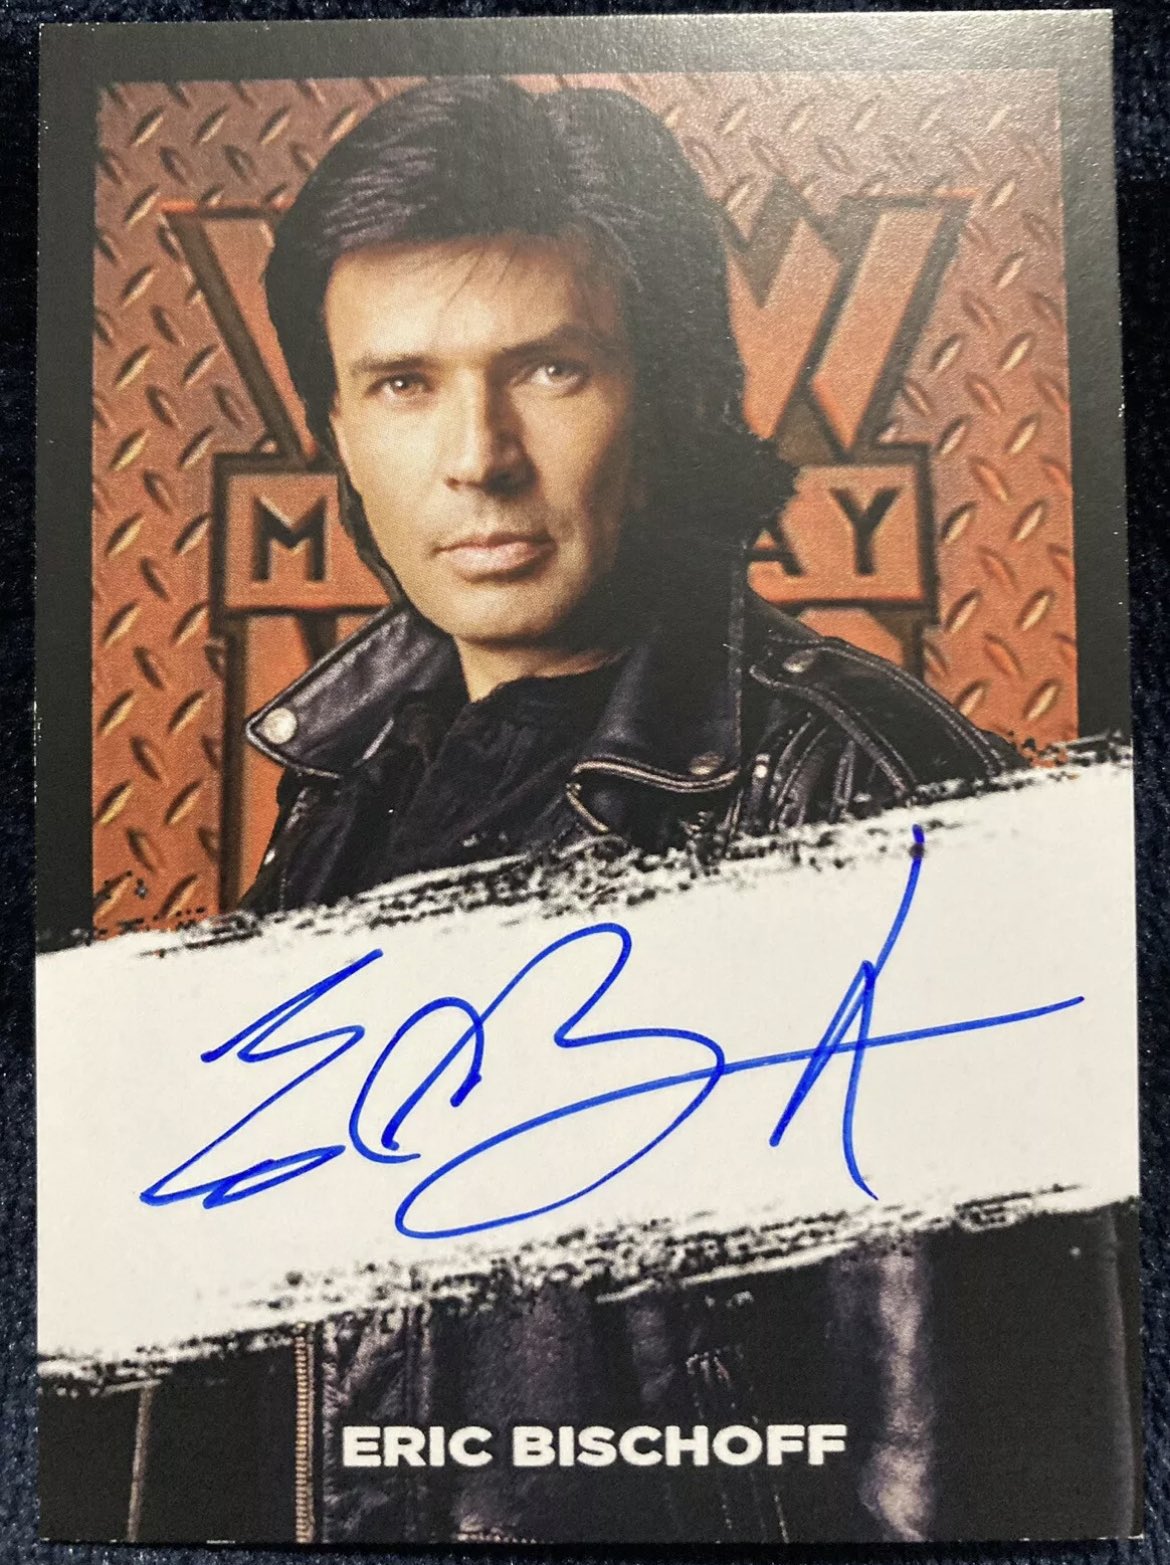 Happy Birthday to the great Eric Bischoff!
Pick up his autograph trading card for $25 each today 